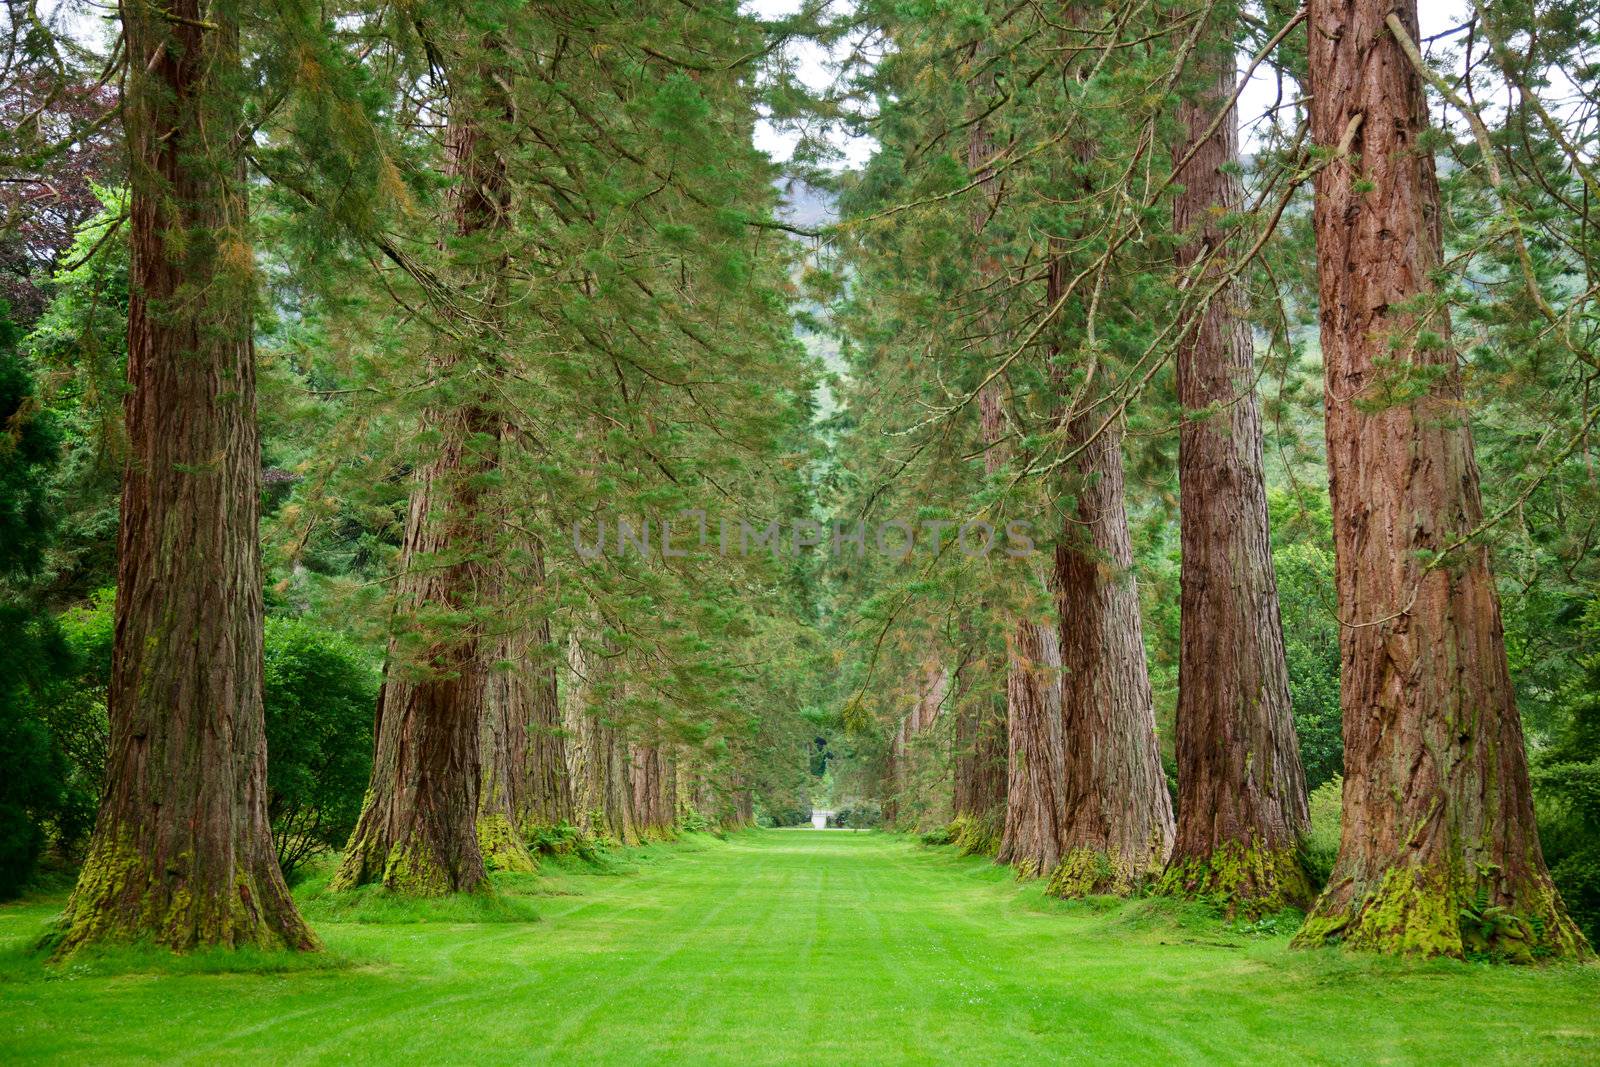 Empty park alley with giant sequoia trees